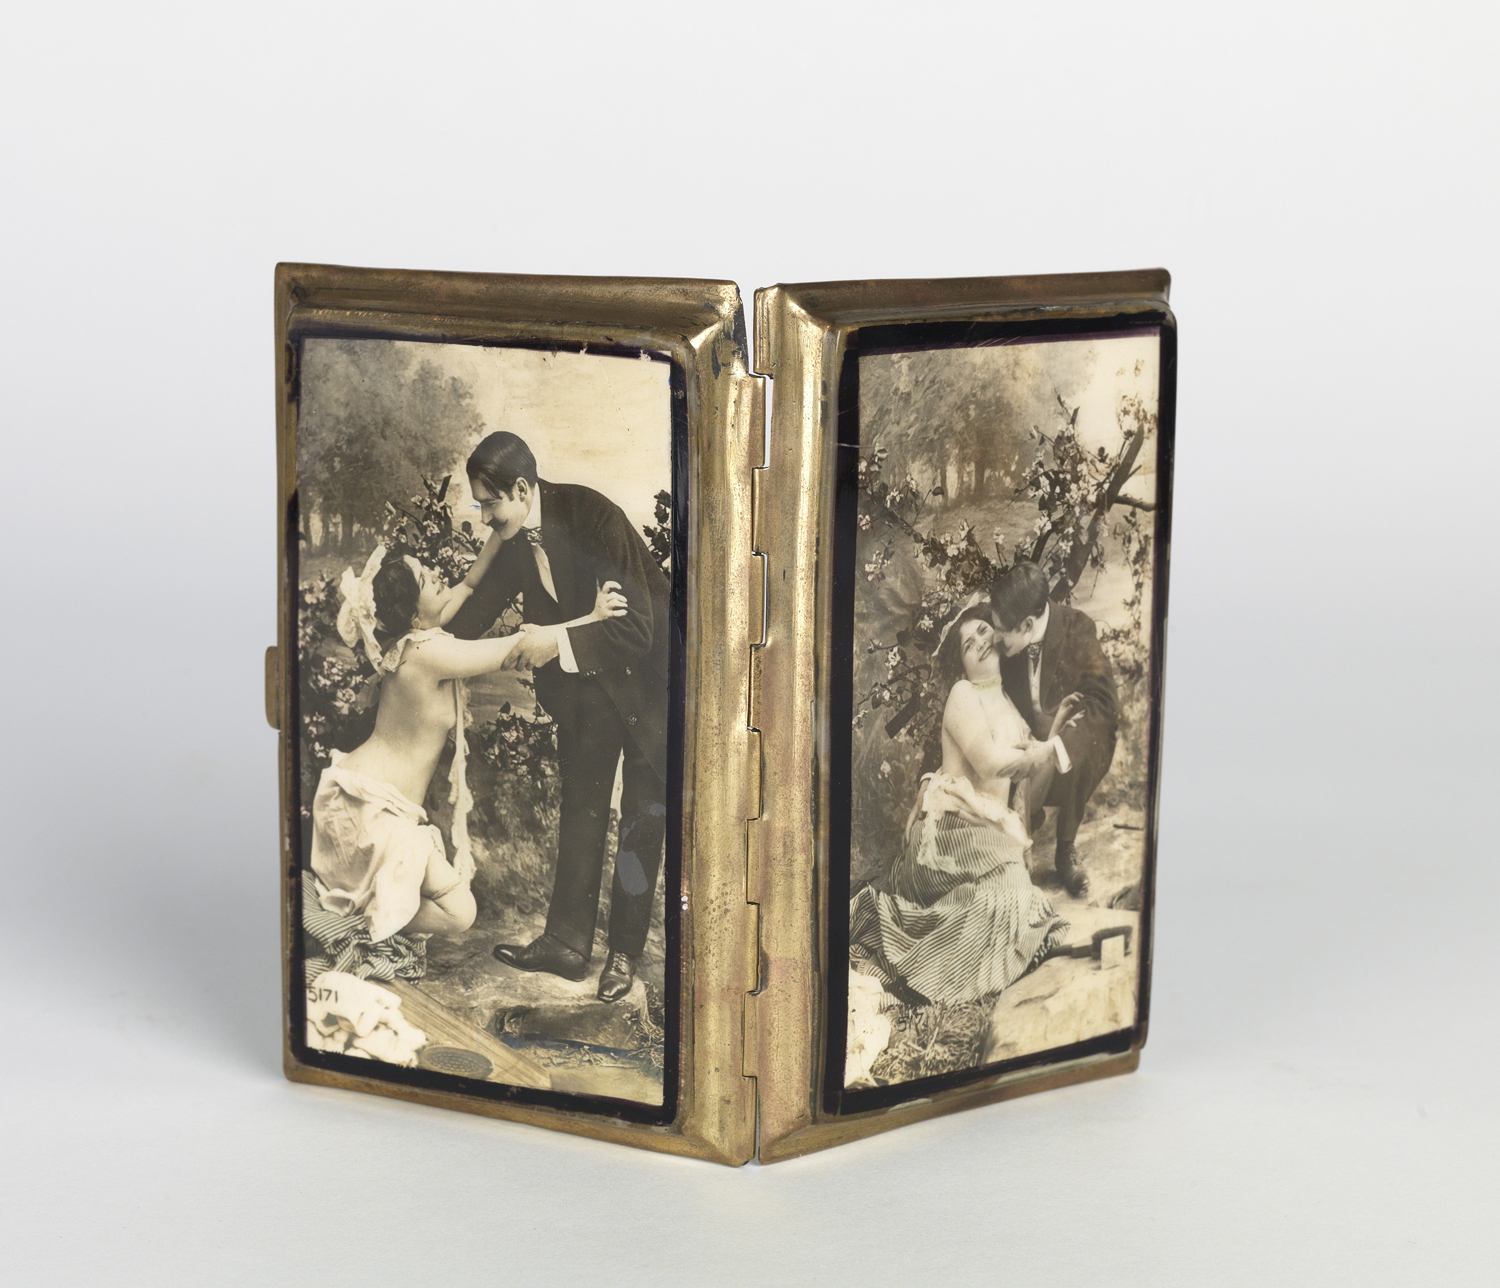    French cigarette case with images on celluloid of an amorous couple.&nbsp; 1900s   